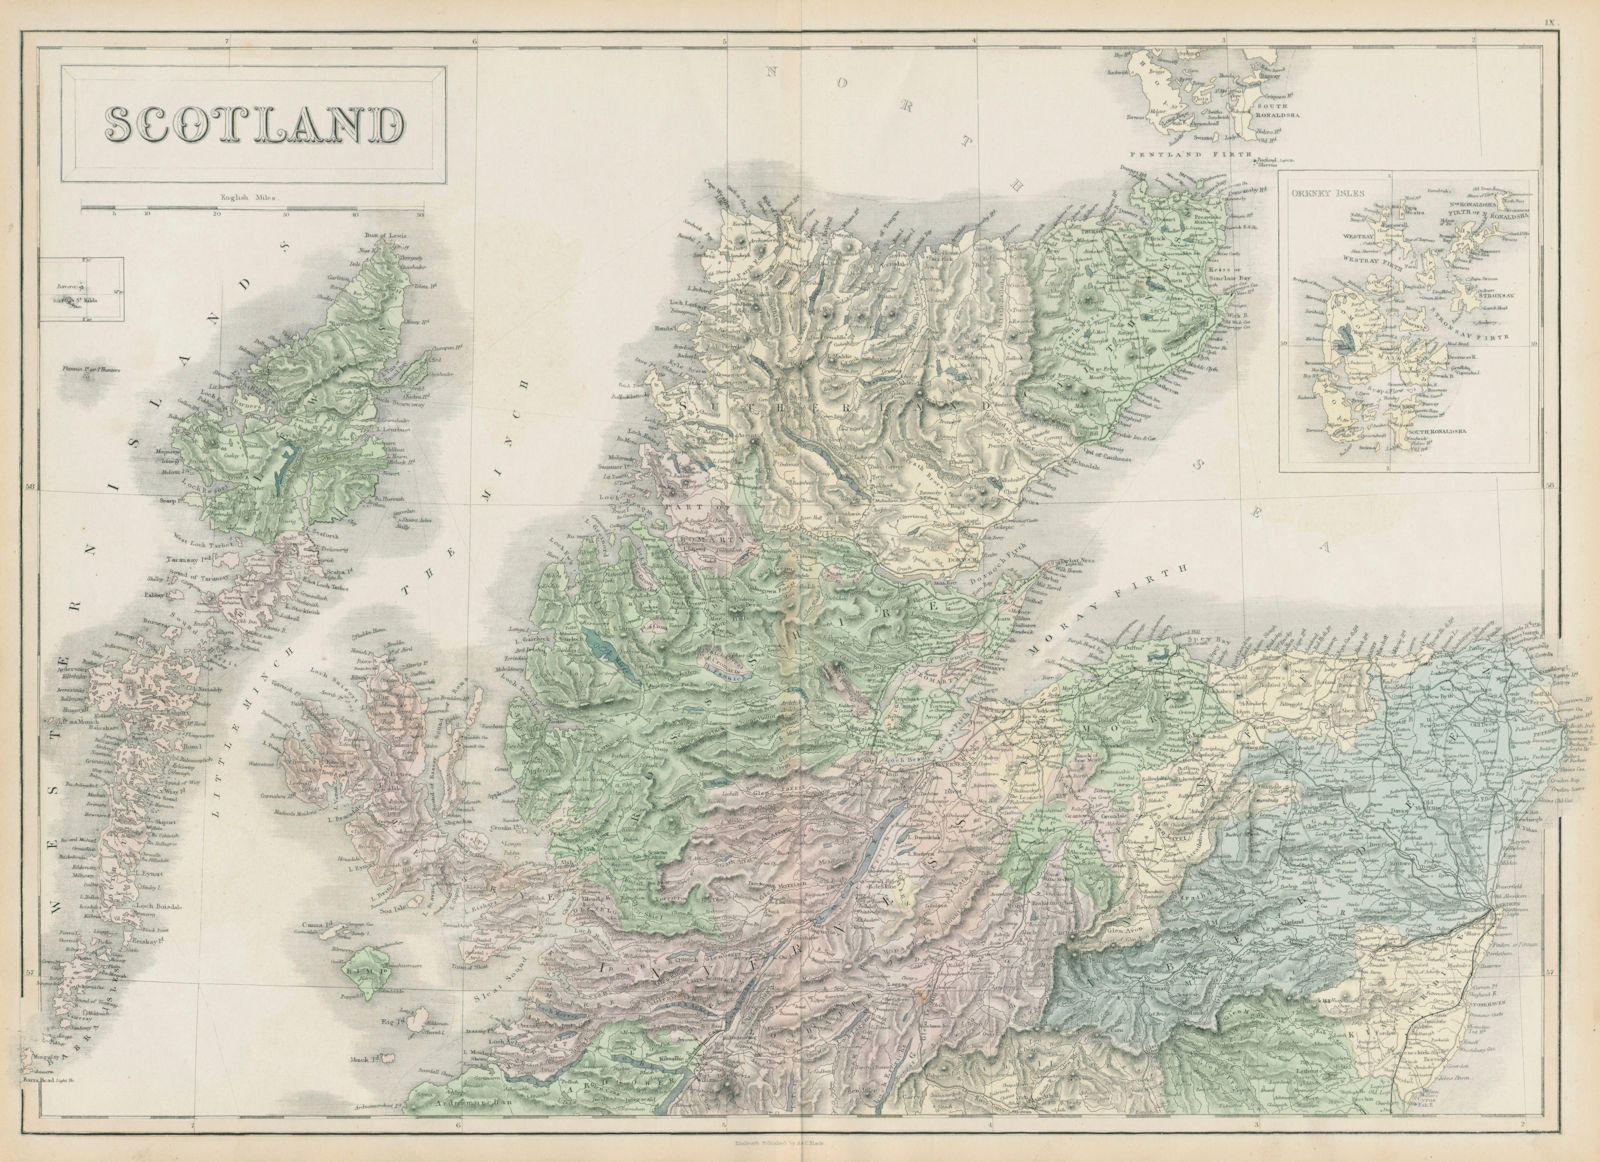 Associate Product Scotland. North sheet. Highlands and Islands. SIDNEY HALL 1856 old antique map